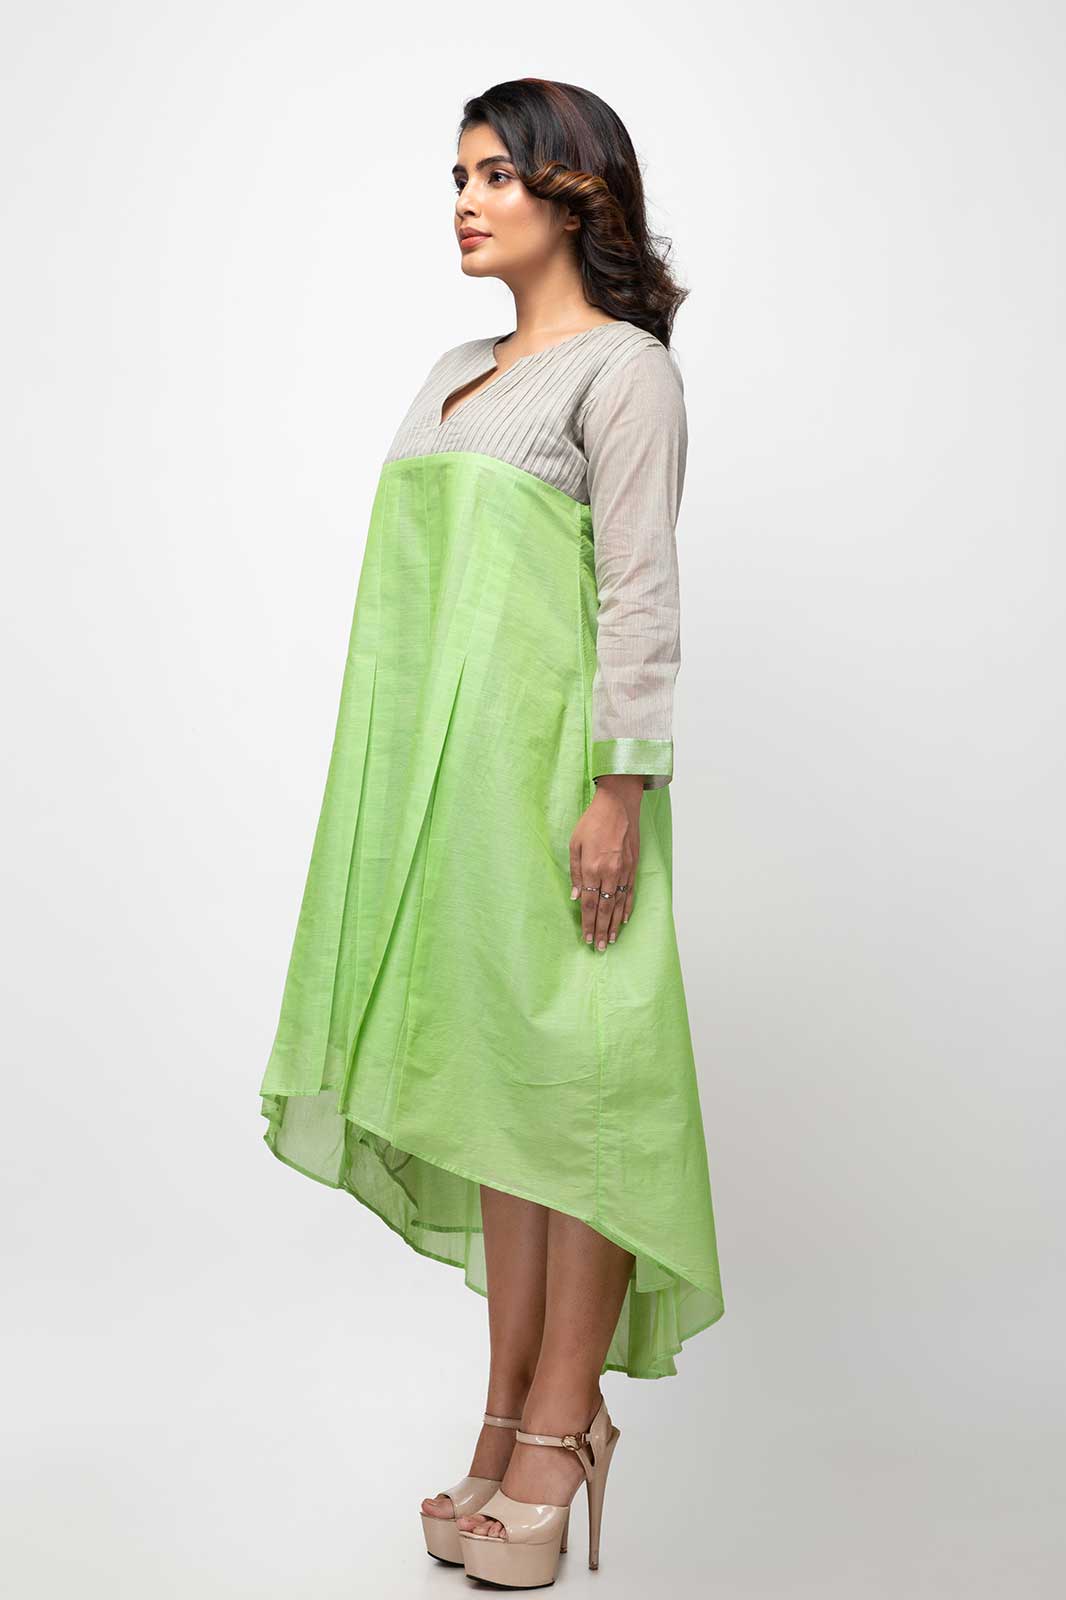 Nonie cotton dress green, cotton green dress, green dress for ladies, green dress for ladies, full sleeve midi dress, full sleeve cotton dress, full sleeve short dress, Sepia stories, Handmade products online, 100% Natural fashion accessories online, Best organic online store, Organic products India, Organic brands online, Natural handmade products, Praful Makhwana, Mister and Mister, Indian handmade products, Indian designer brand, Indian accessories, Women Dresses online, shop organic handmade dresses, handmade dresses for women, shop women dresses online, designer dresses, Indian handmade dresses, fashionable dresses, Women dresses, organic dresses, dresses for women, designer women dresses, handmade women dresses, organic handmade clothing, handmade organic clothing, natural fabrics, handcrafted clothing in India, organic fabrics, eco-friendly clothing brands, organic clothing range, sustainable clothing